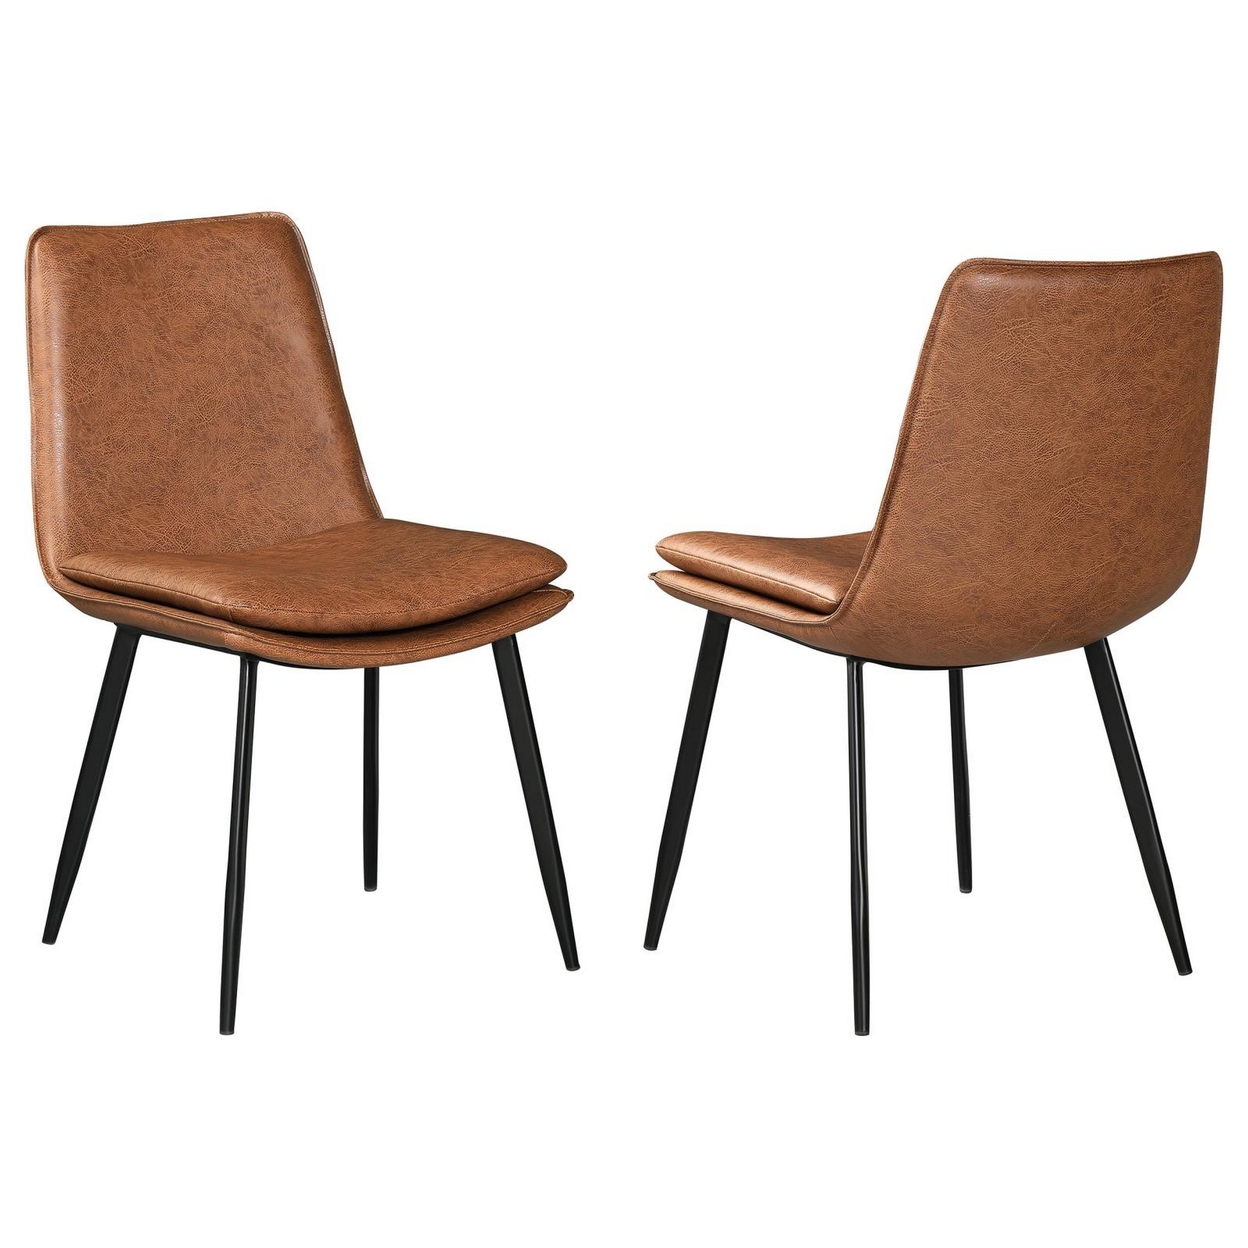 19 Inch Dining Chair, Brown Faux Leather Seat, Black Tapered Legs, Set Of 2-Saltoro Sherpi